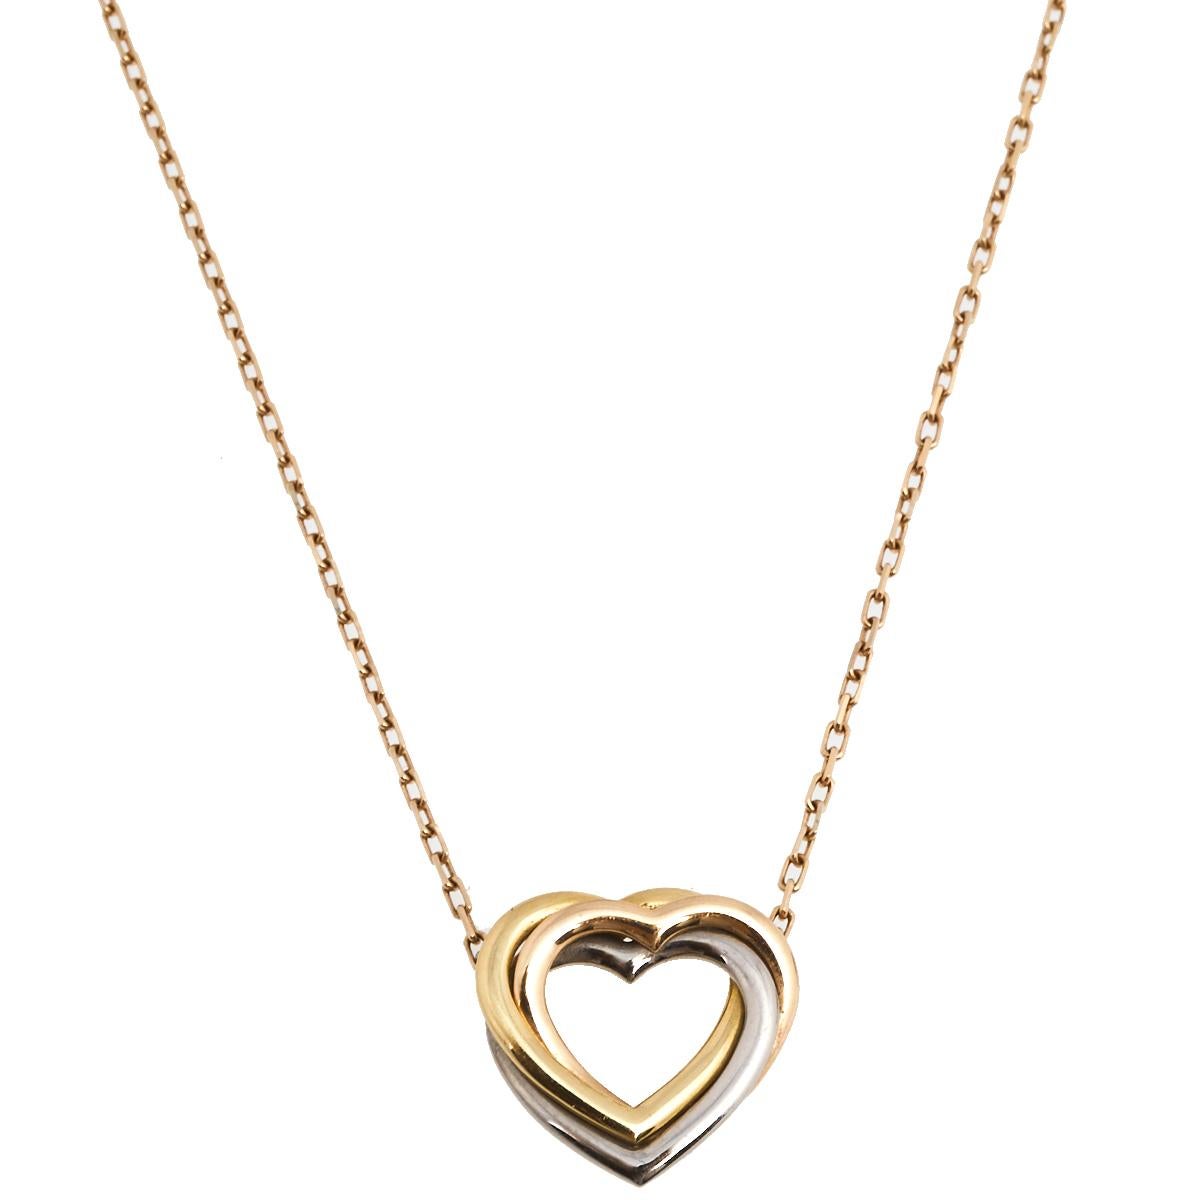 This Trinity de Cartier necklace has a pendant crafted with 18k three-tone gold that interlock with one another to form a single magnificent heart whilst being held by a delicate chain with a lobster clasp. The necklace is will make a worthy buy.